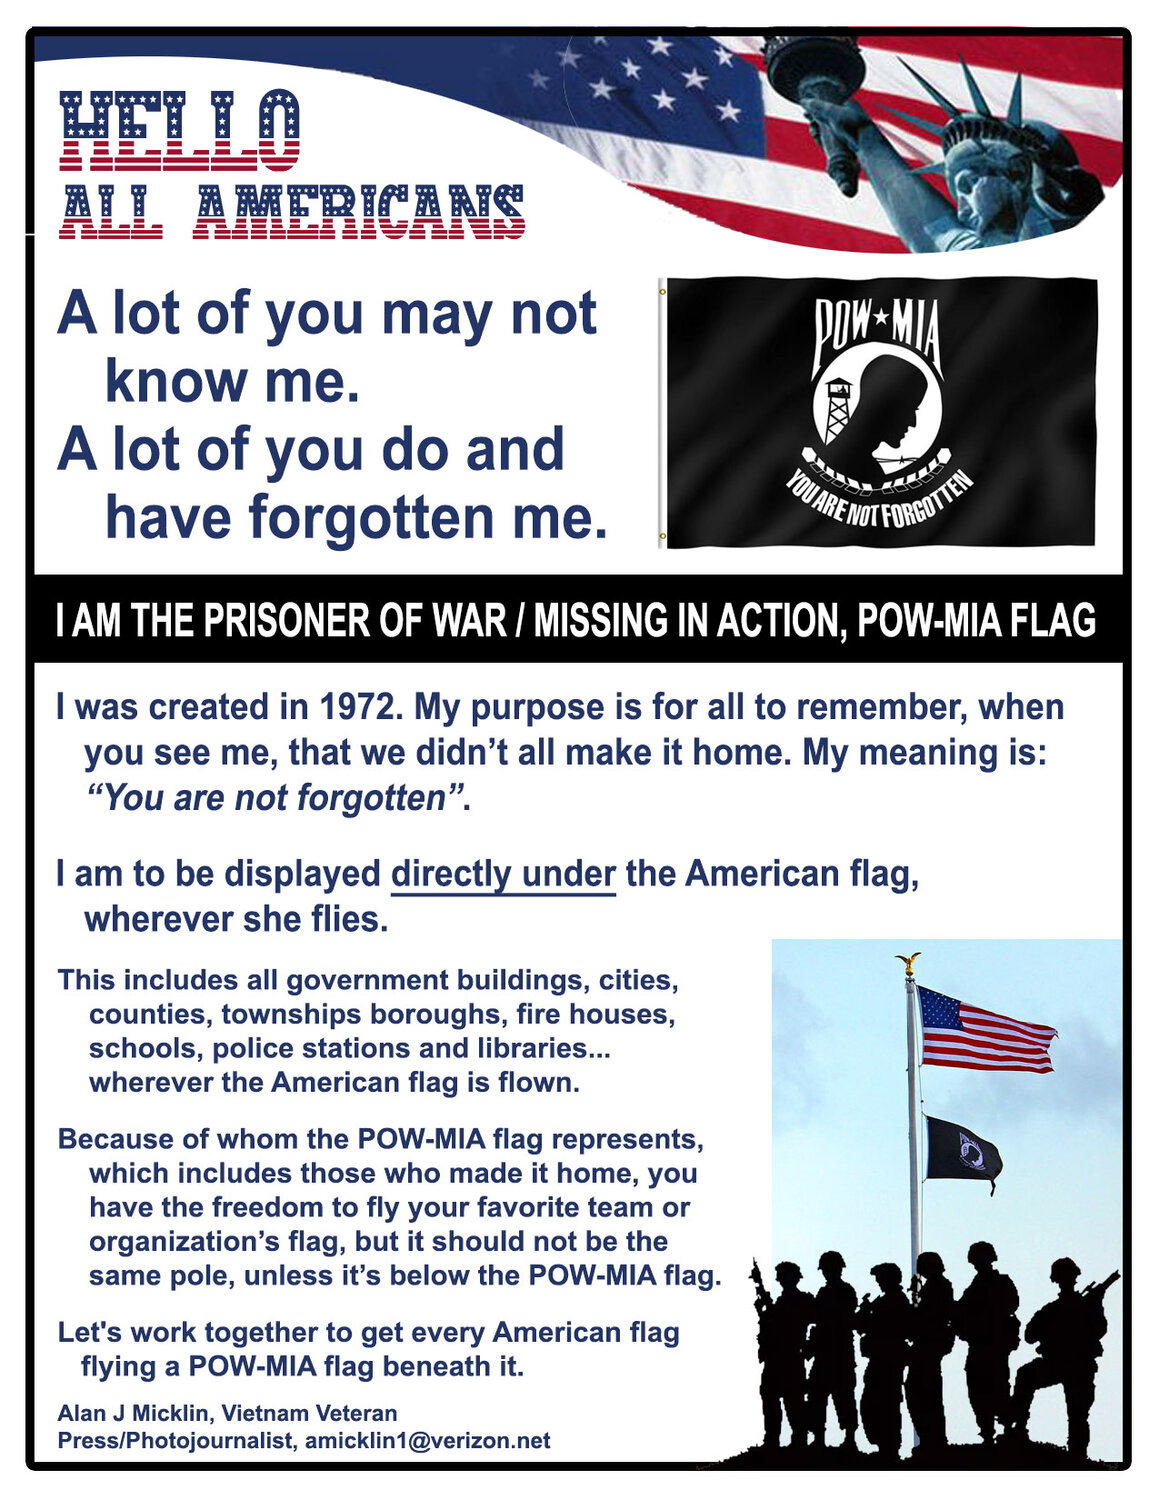 A flyer that Alan Micklin produced to promote his effort to encourage people and organizations to fly the POW-MIA flag wherever the stars and stripes are flown.